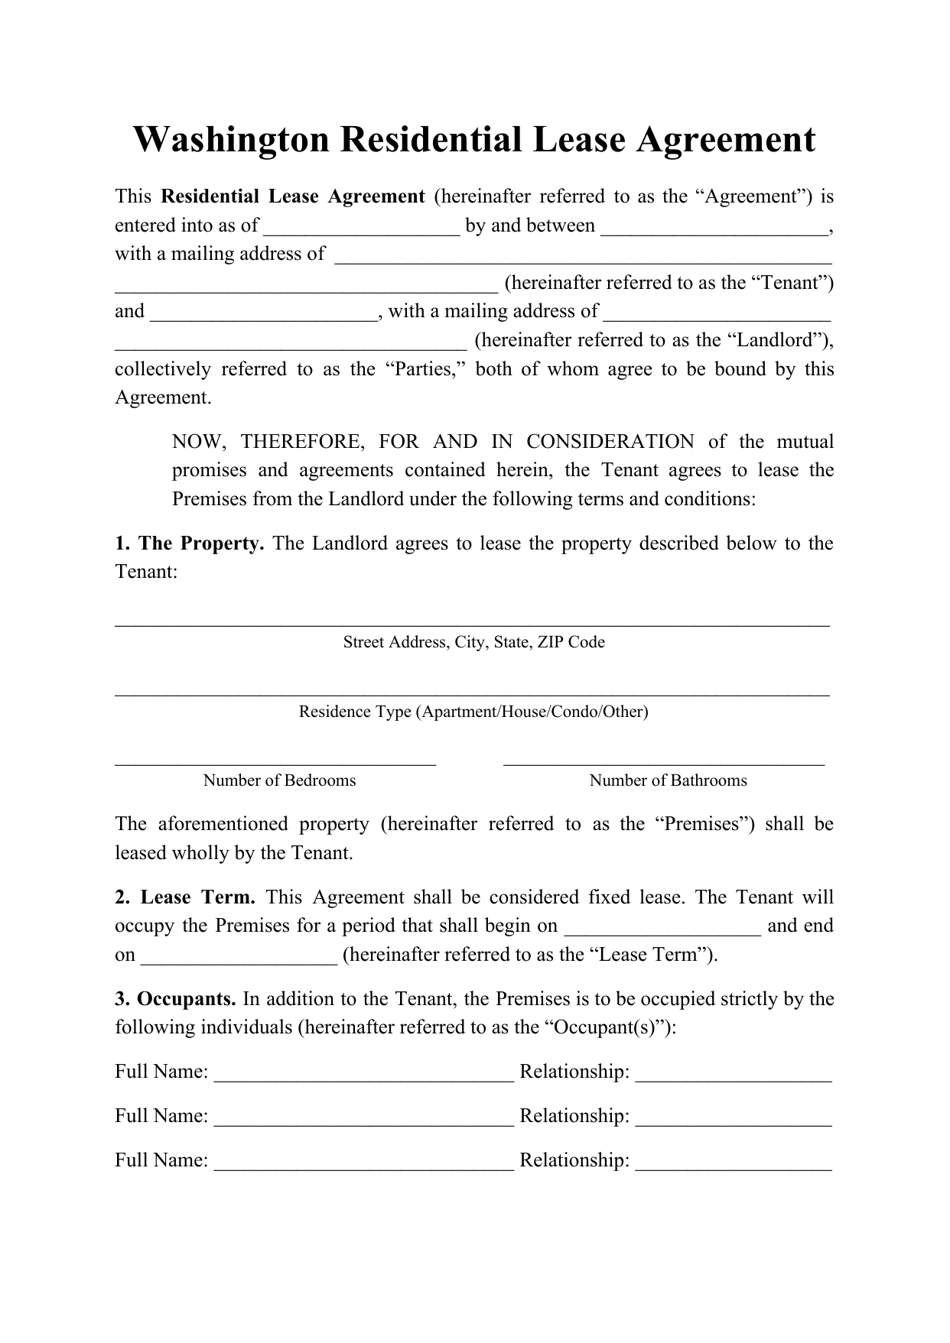 Residential Lease Agreement Template - Washington, Page 1